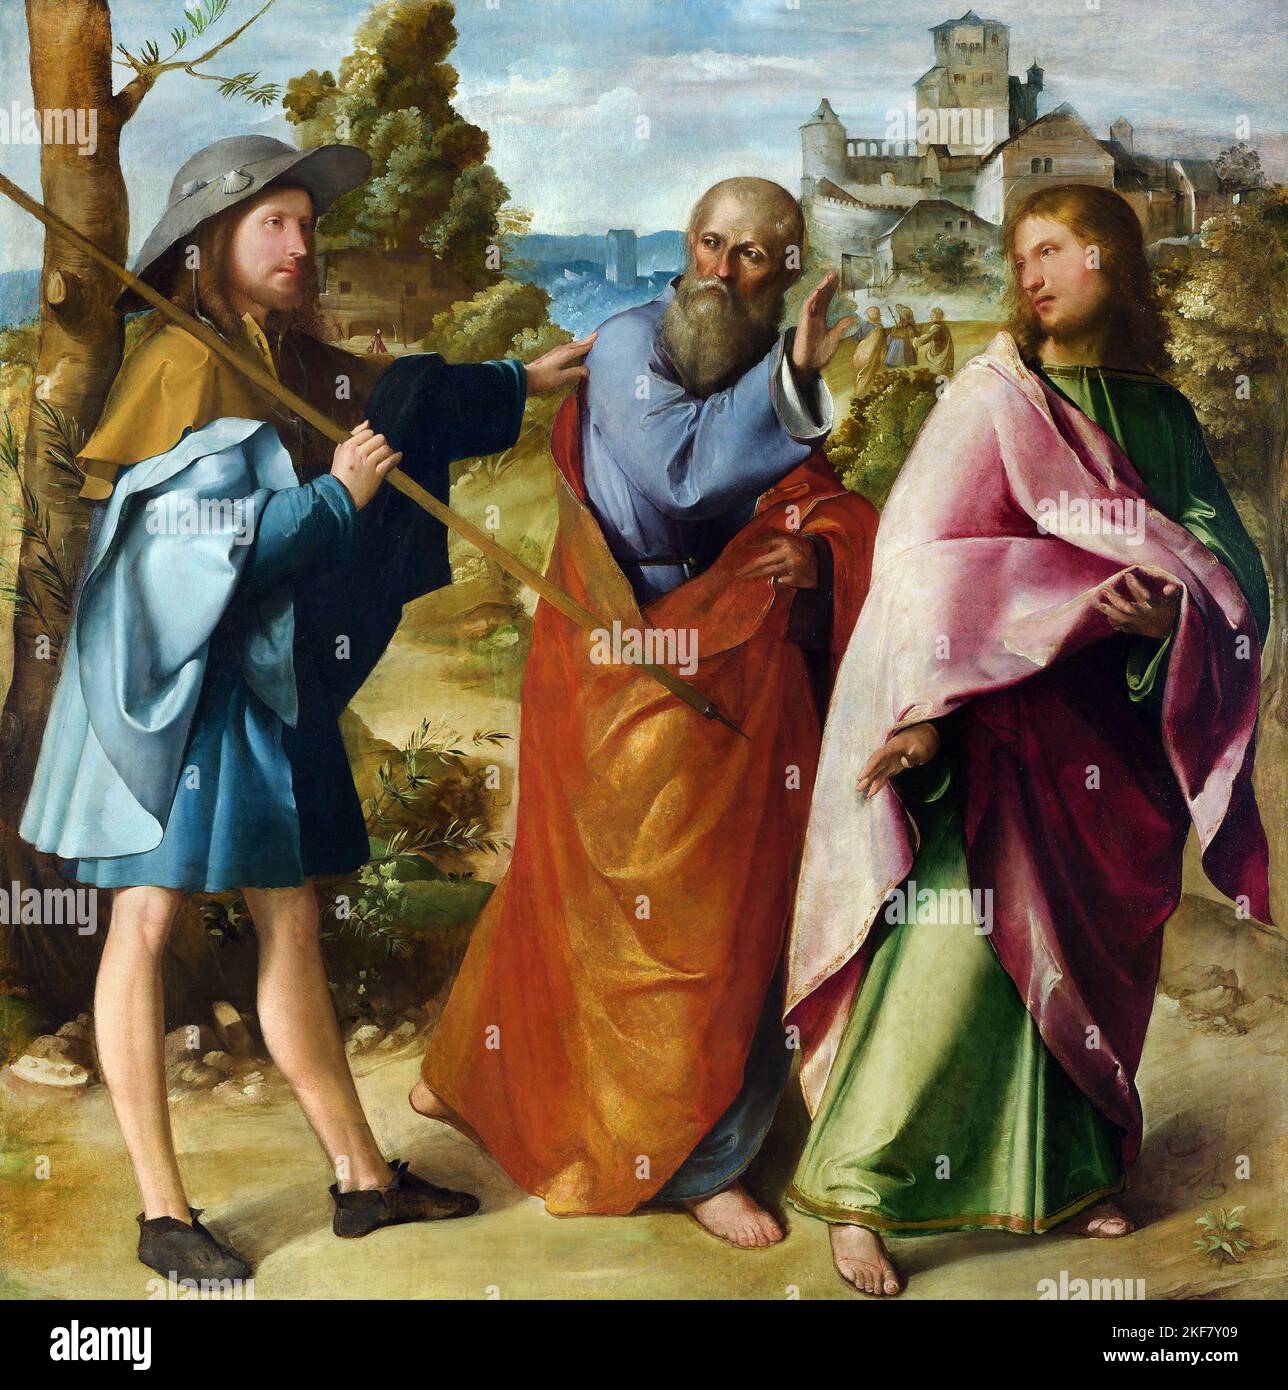 Altobello Melone; The Road to Emmaus; Circa 1516-1517; Oil on panel; National Gallery, London, UK. Stock Photo